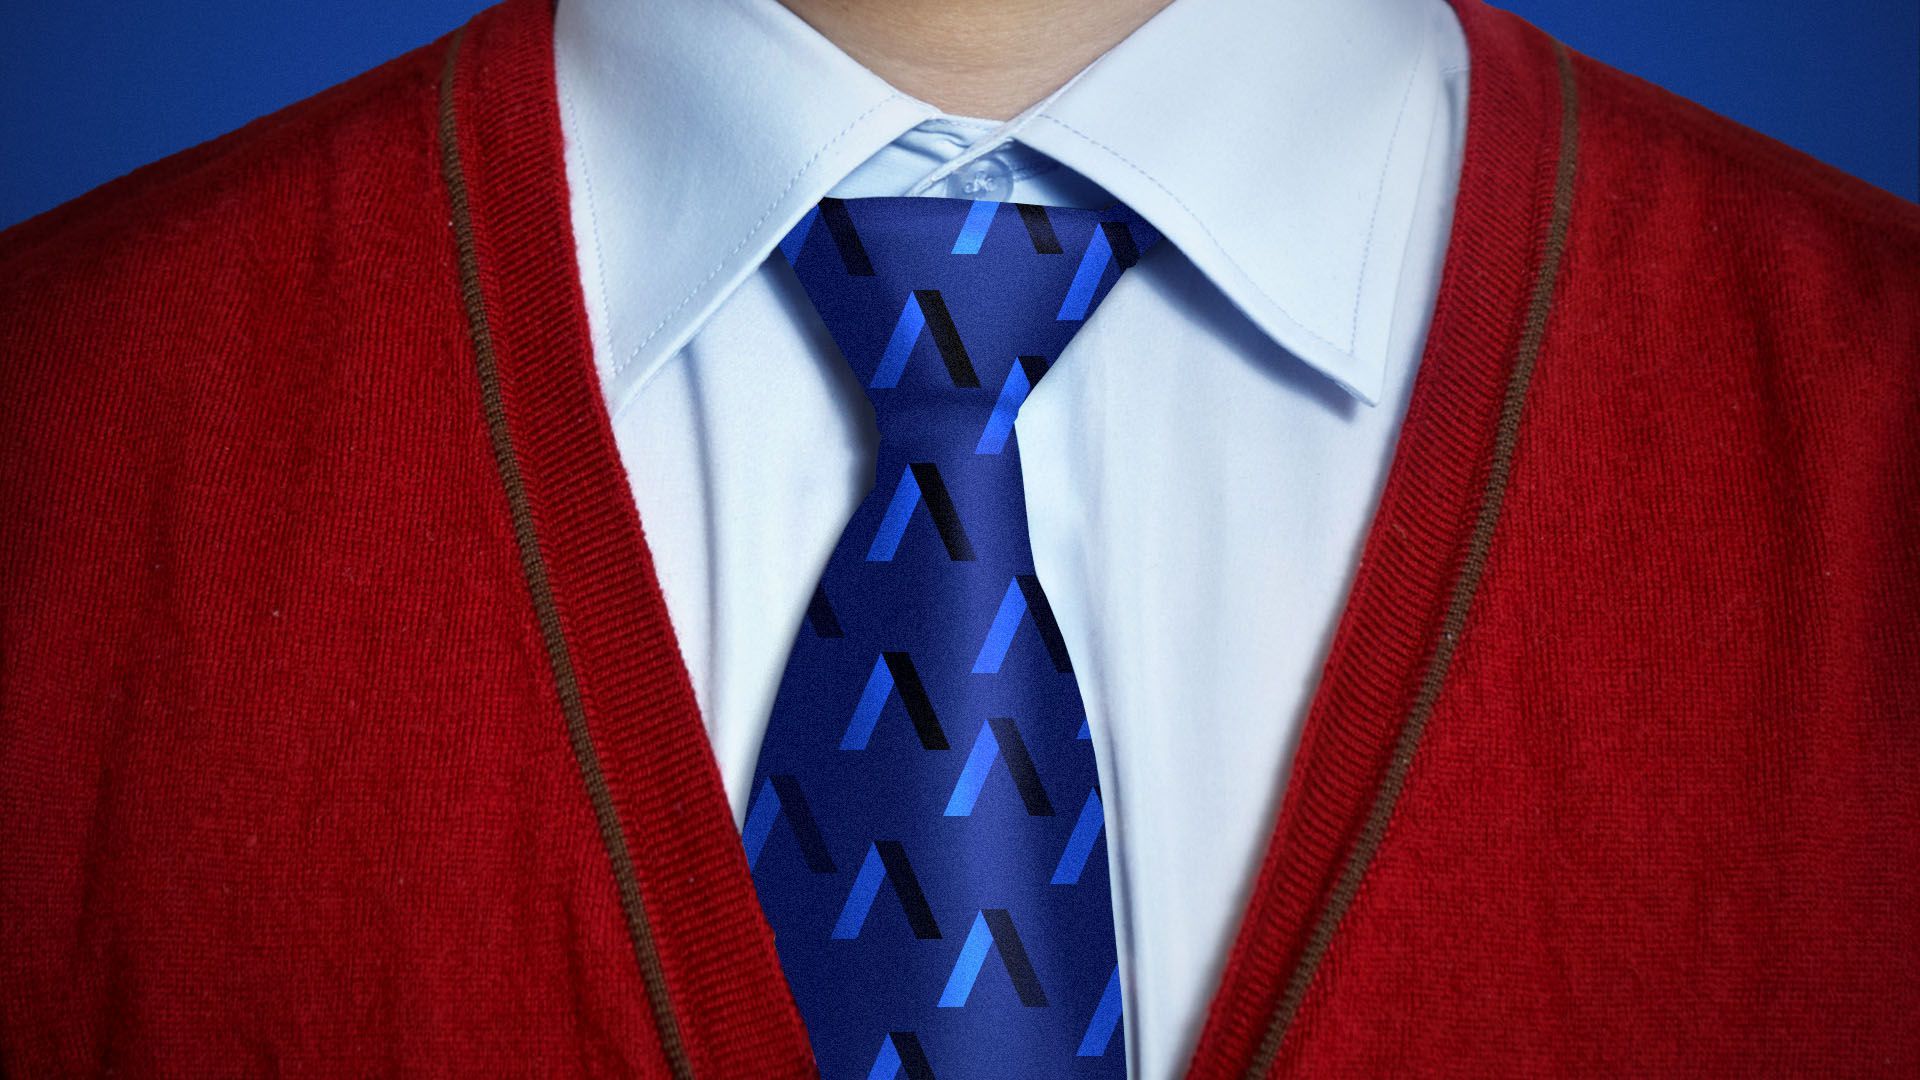 Illustration of person in a red cardigan and tie with an Axios logo pattern.